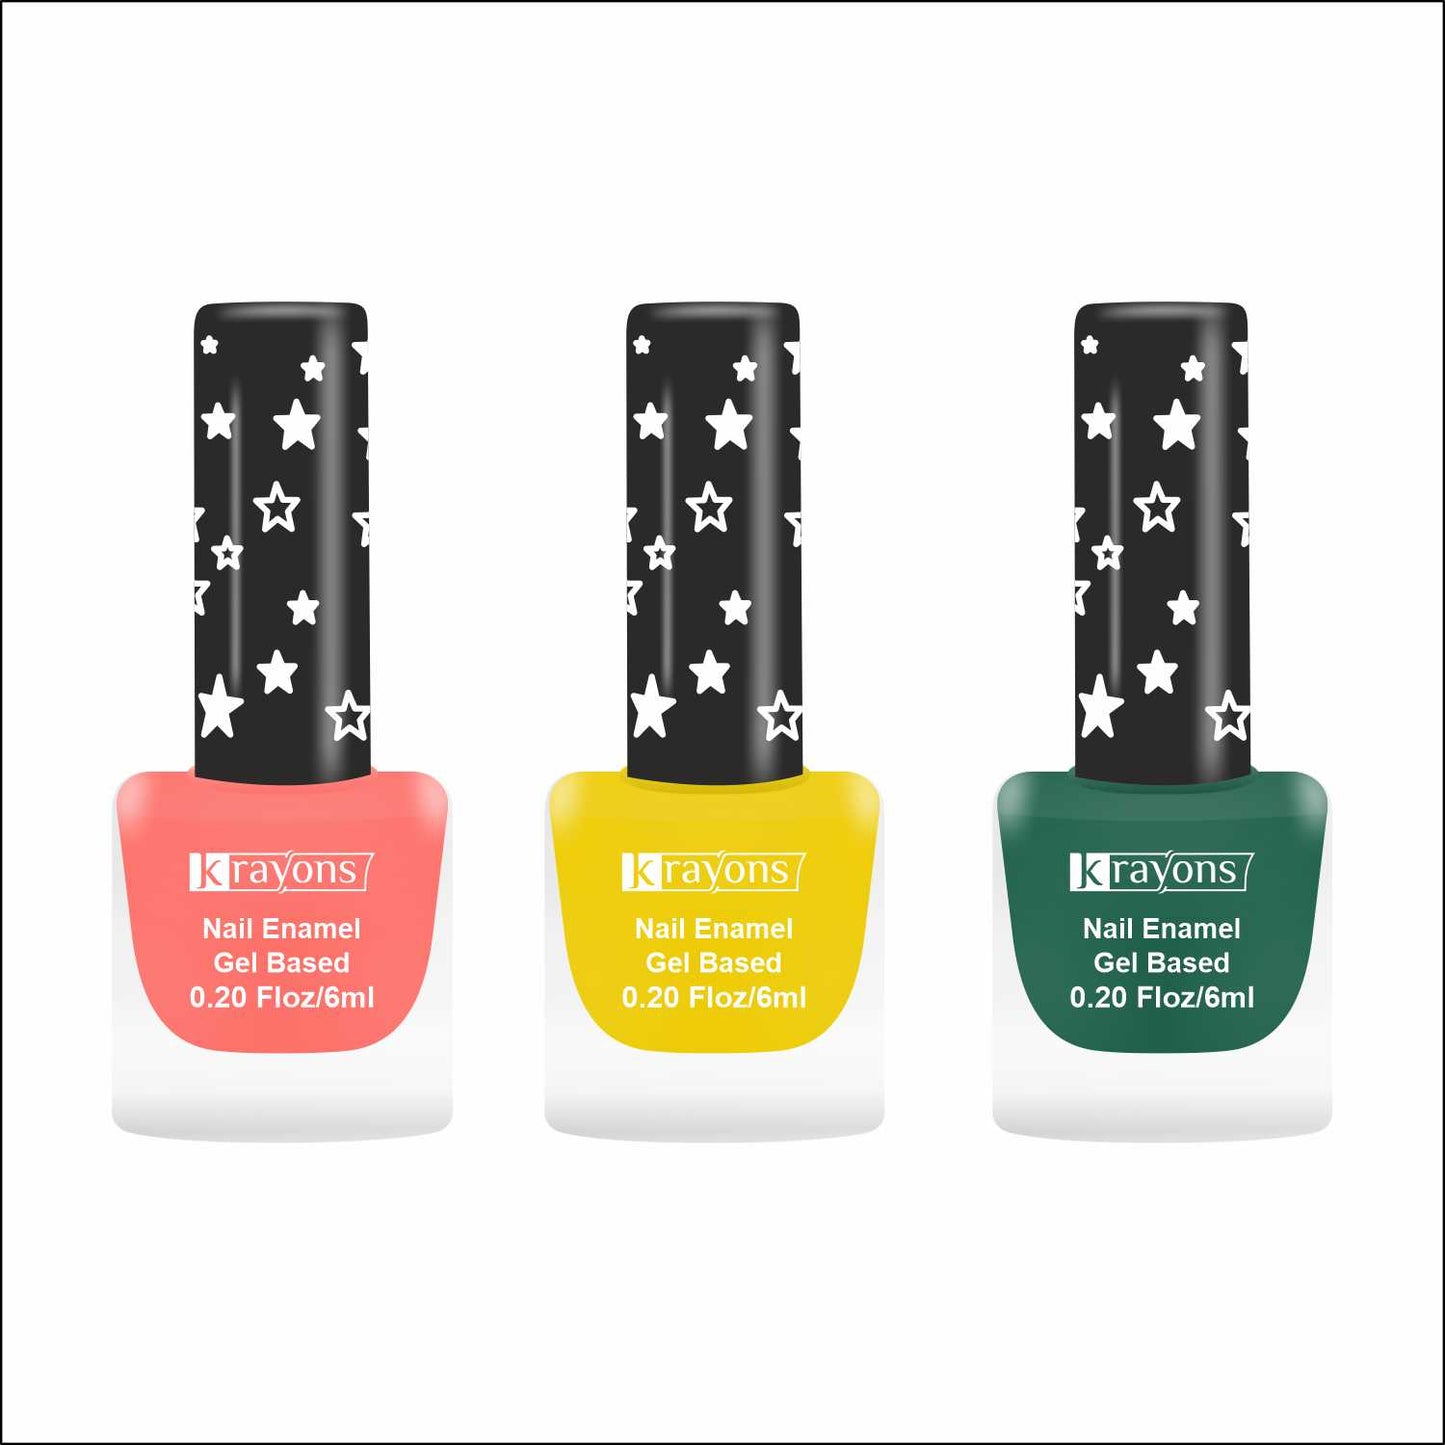 Krayons Cute Super Matte Finish Nail Enamel, Quick Dry, LongLasting, Blossom Peach, Lemon Yellow, Forest Green, 6ml Each (Pack of 3)